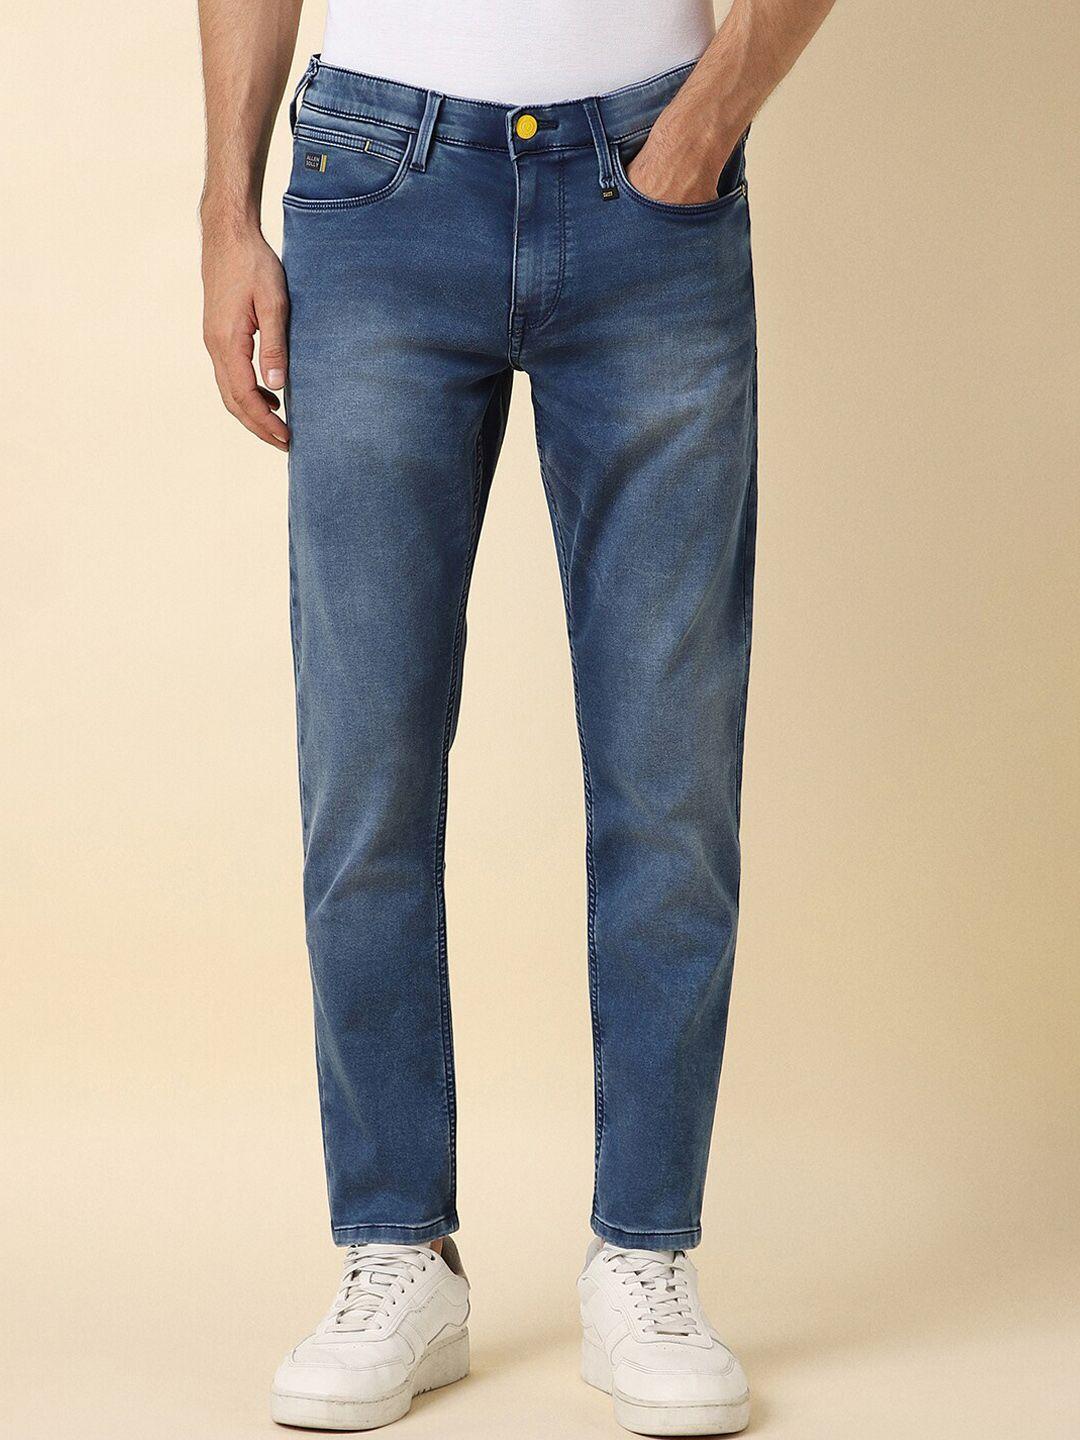 allen-solly-men-slim-fit-light-fade-clean-look-stretchable-jeans